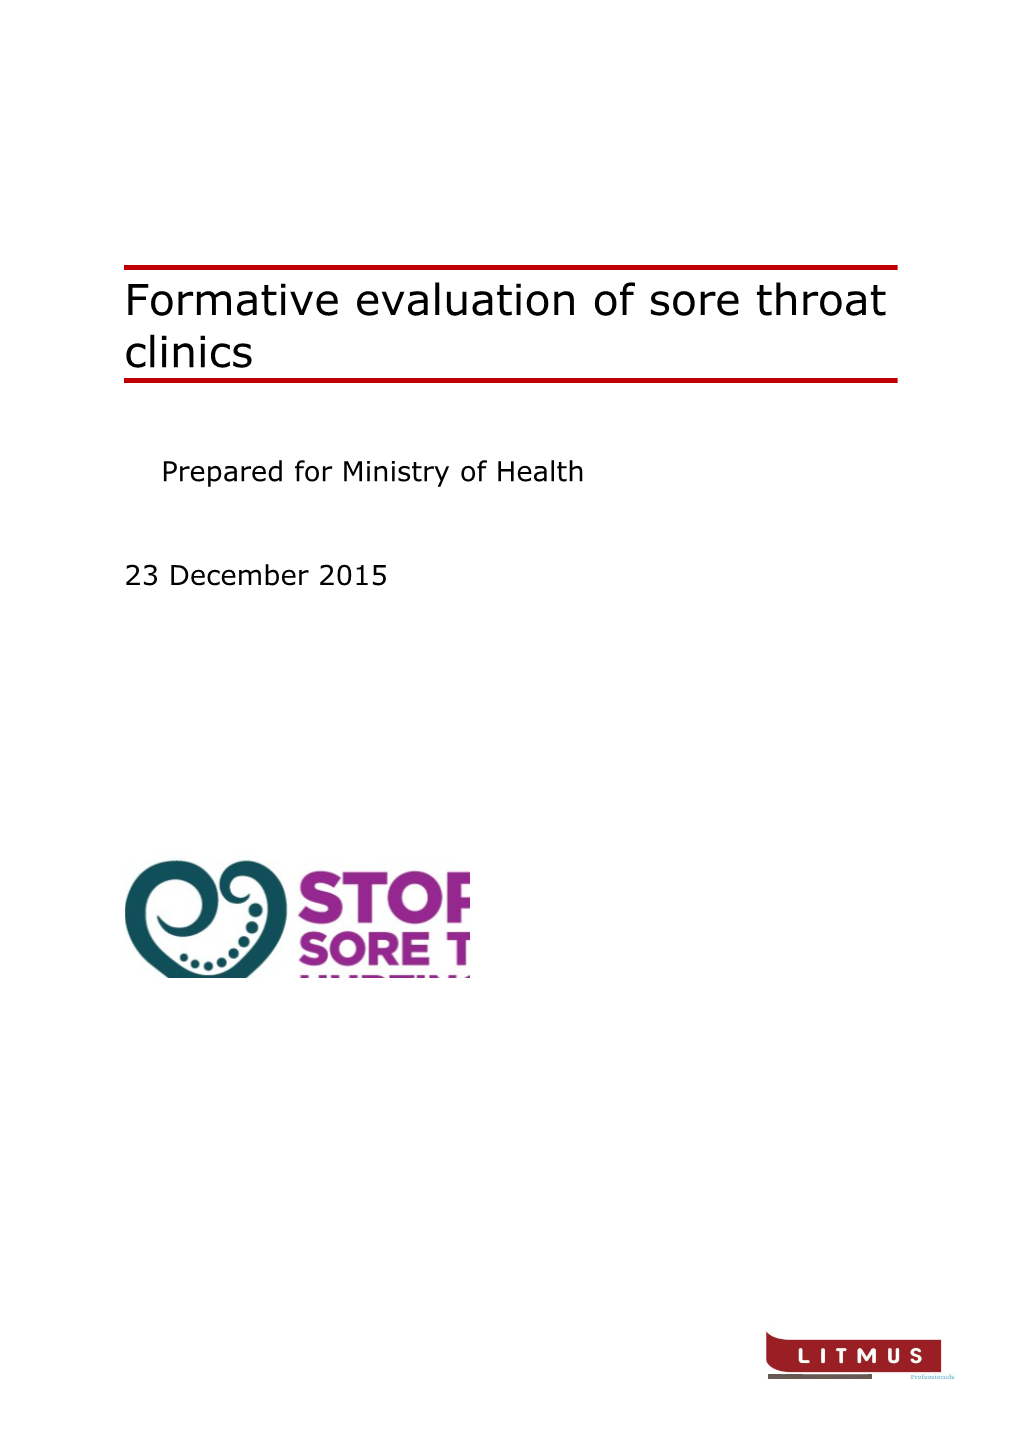 Formative Evaluation of Sore Throat Clinics